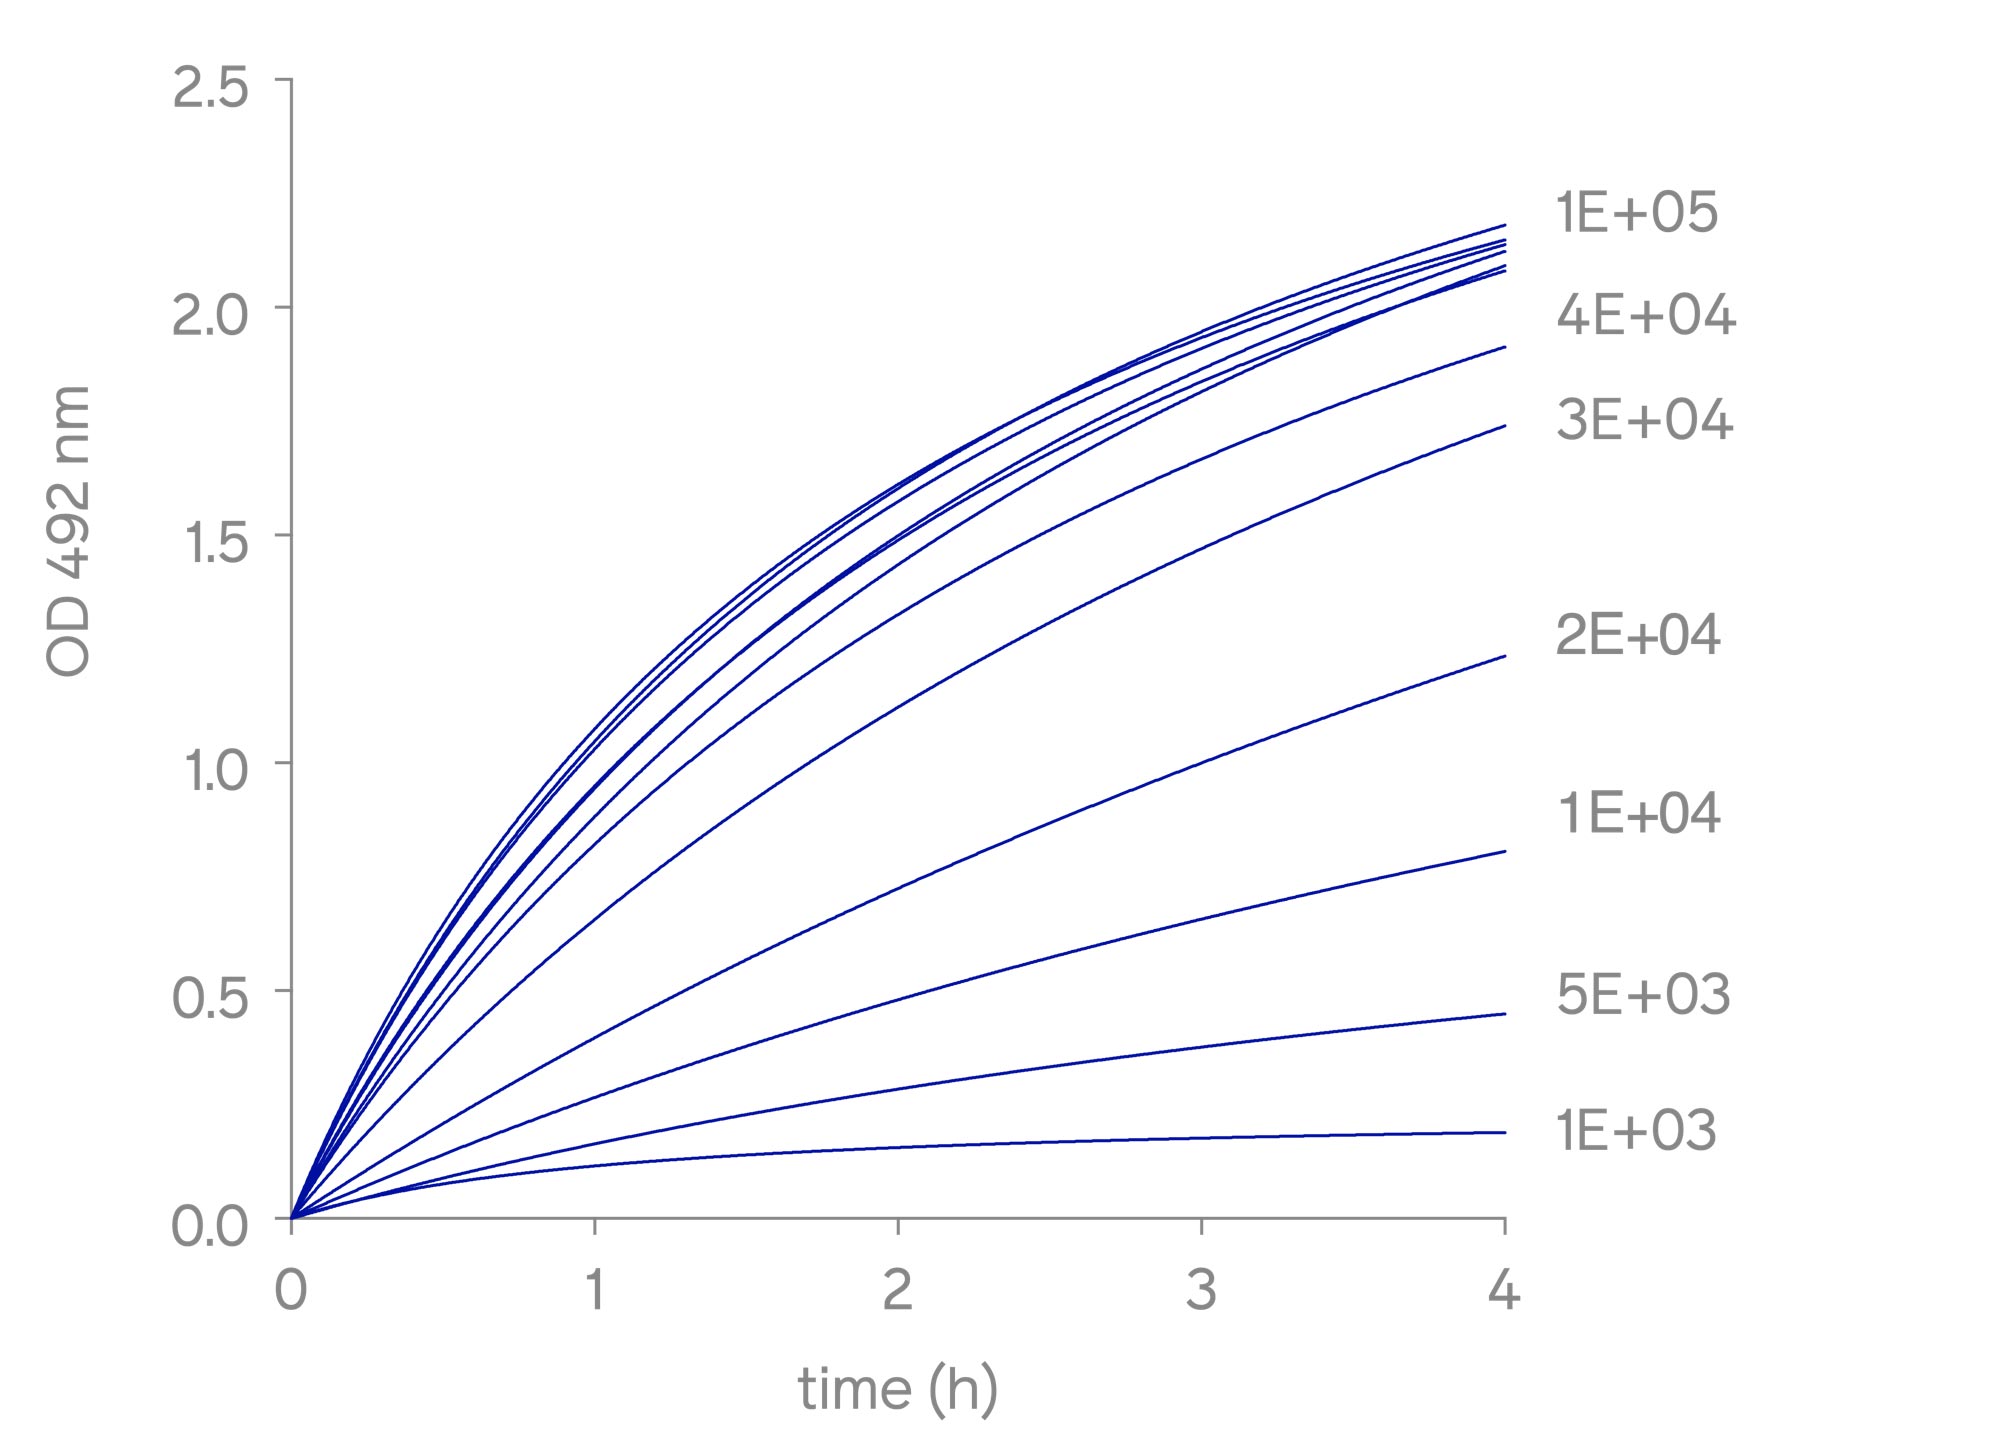 Figure 2: Kinetic analysis of XTT metabolization over time with different cell densities Validating Absorbance 96 Application for XTT Assay Using The instaCELL® Cytotoxicity Kit (XTT) Byonoy